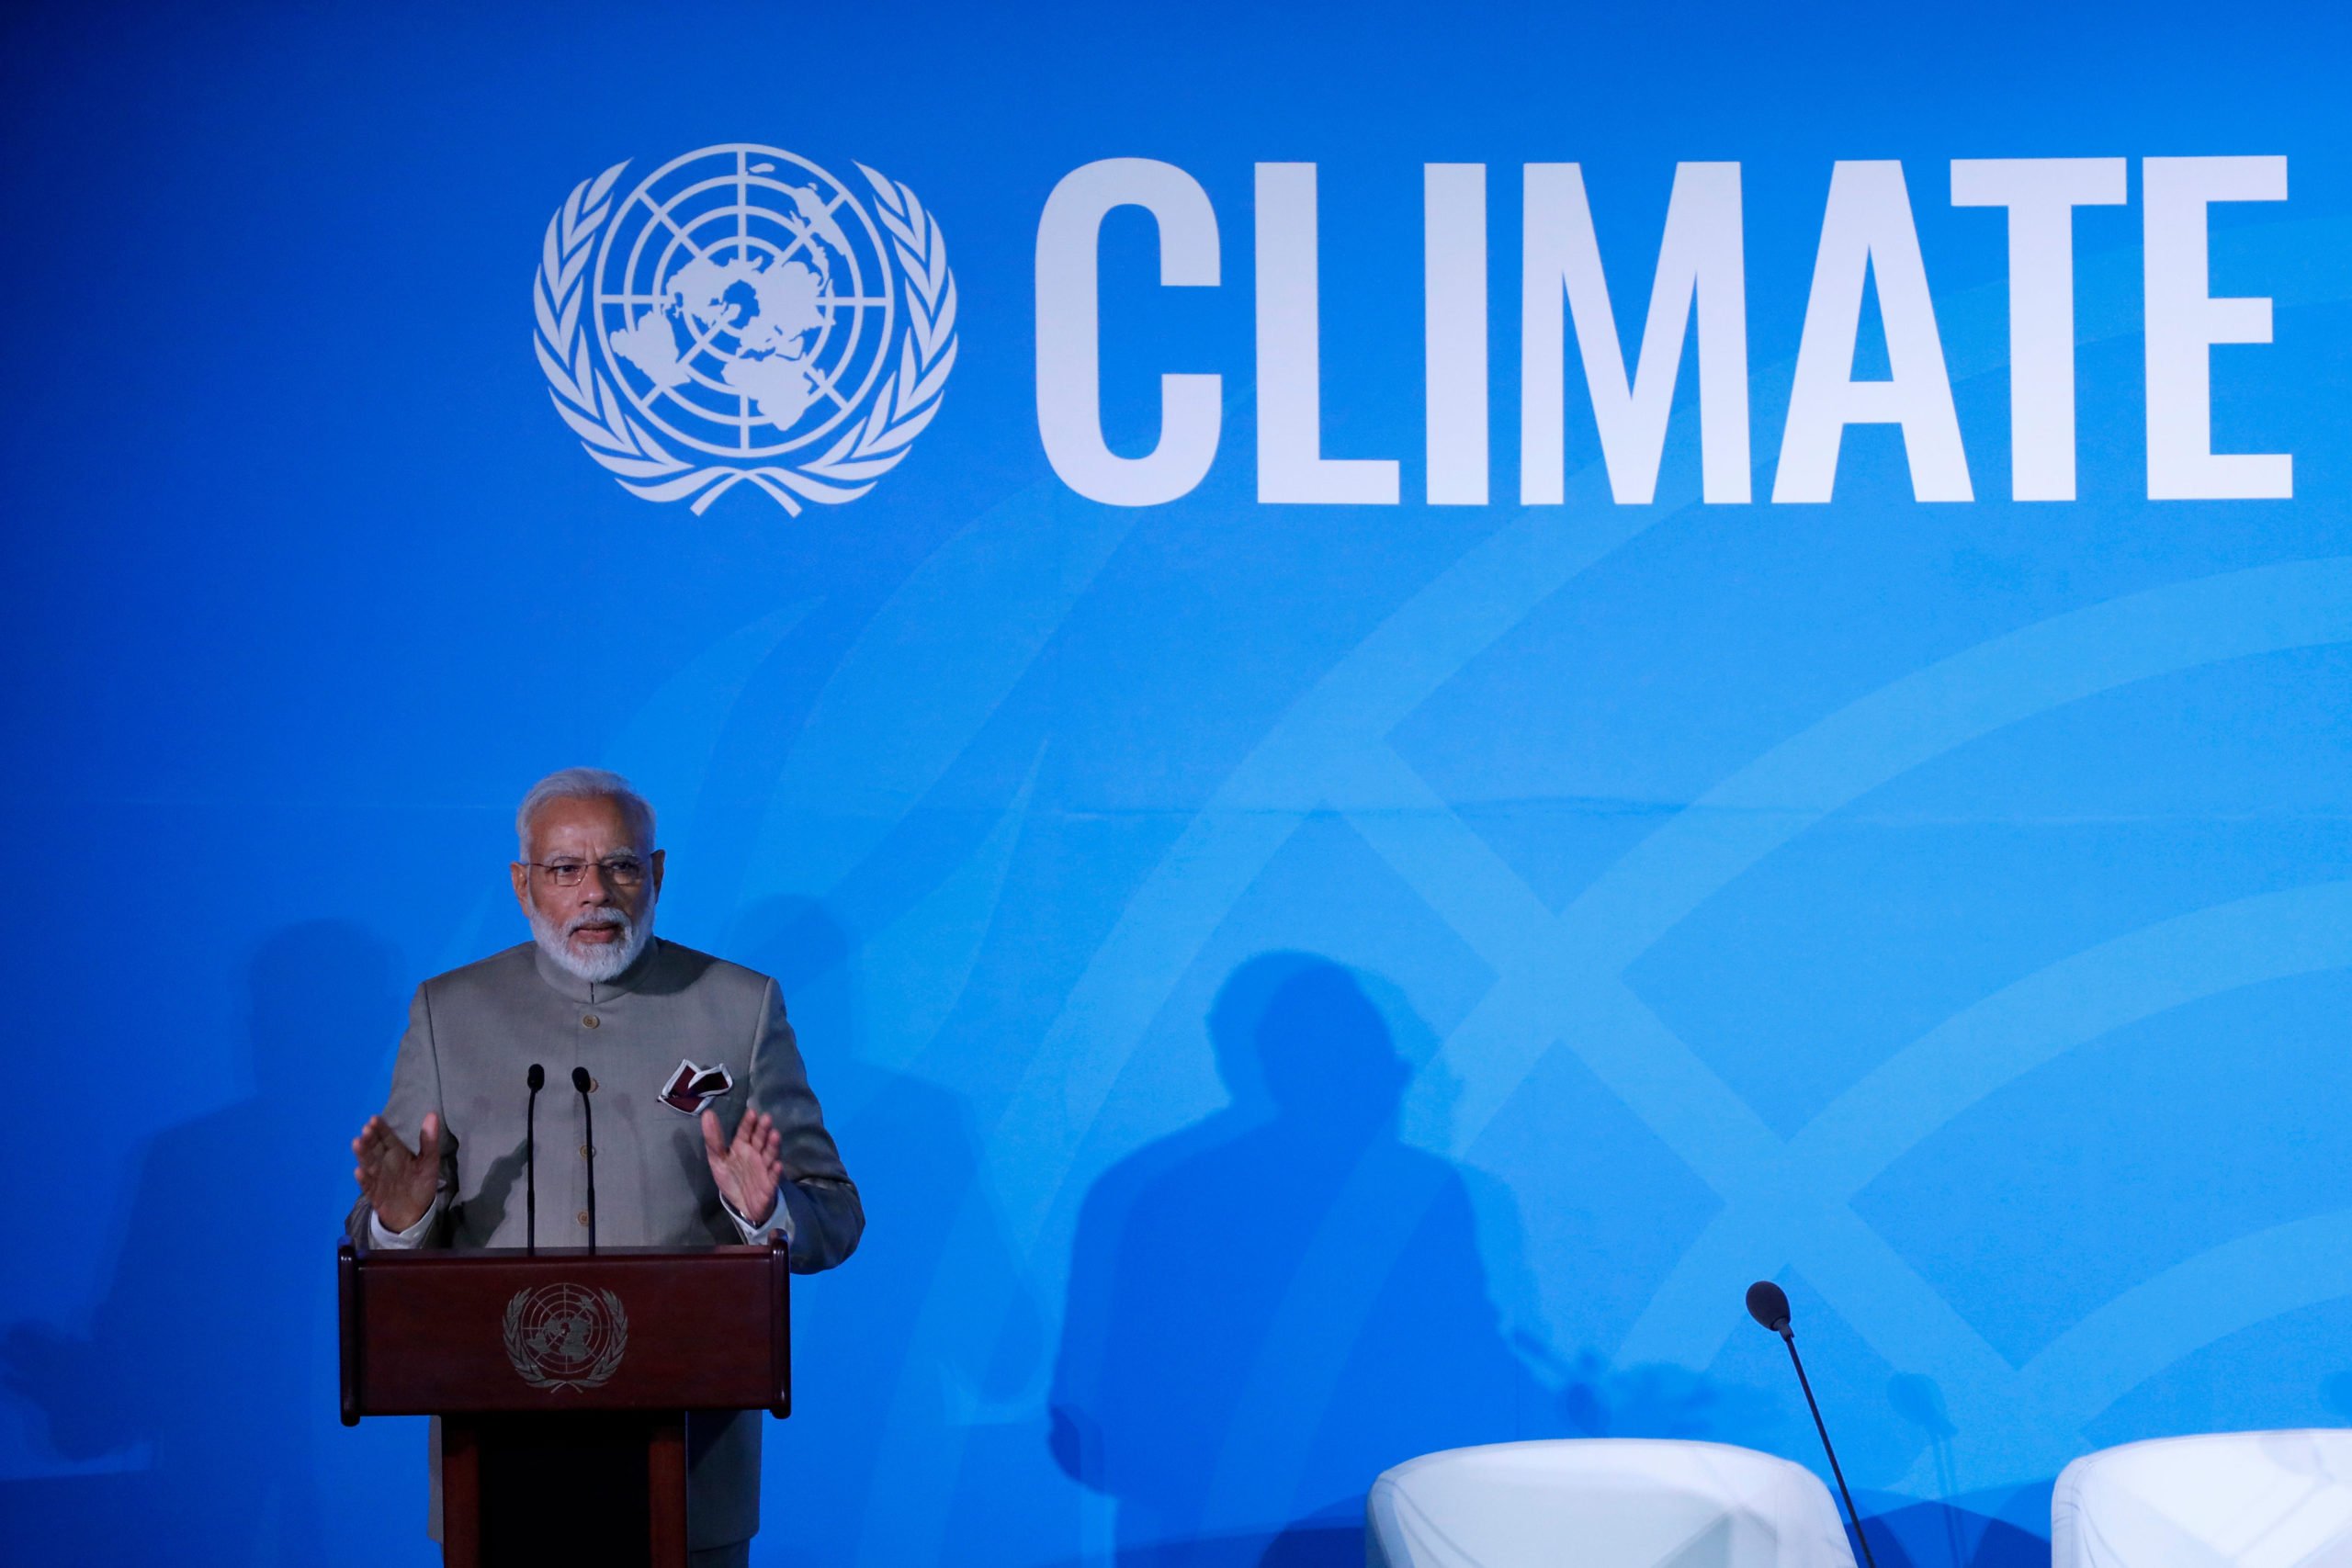 <p>Prime Minister Narendra Modi speaking at the Climate Action Summit in 2019. In the lead up to the World Leaders Summit, anticipation was high for India’s climate pledges at COP26. (Image: Xinhua / Alamy)</p>